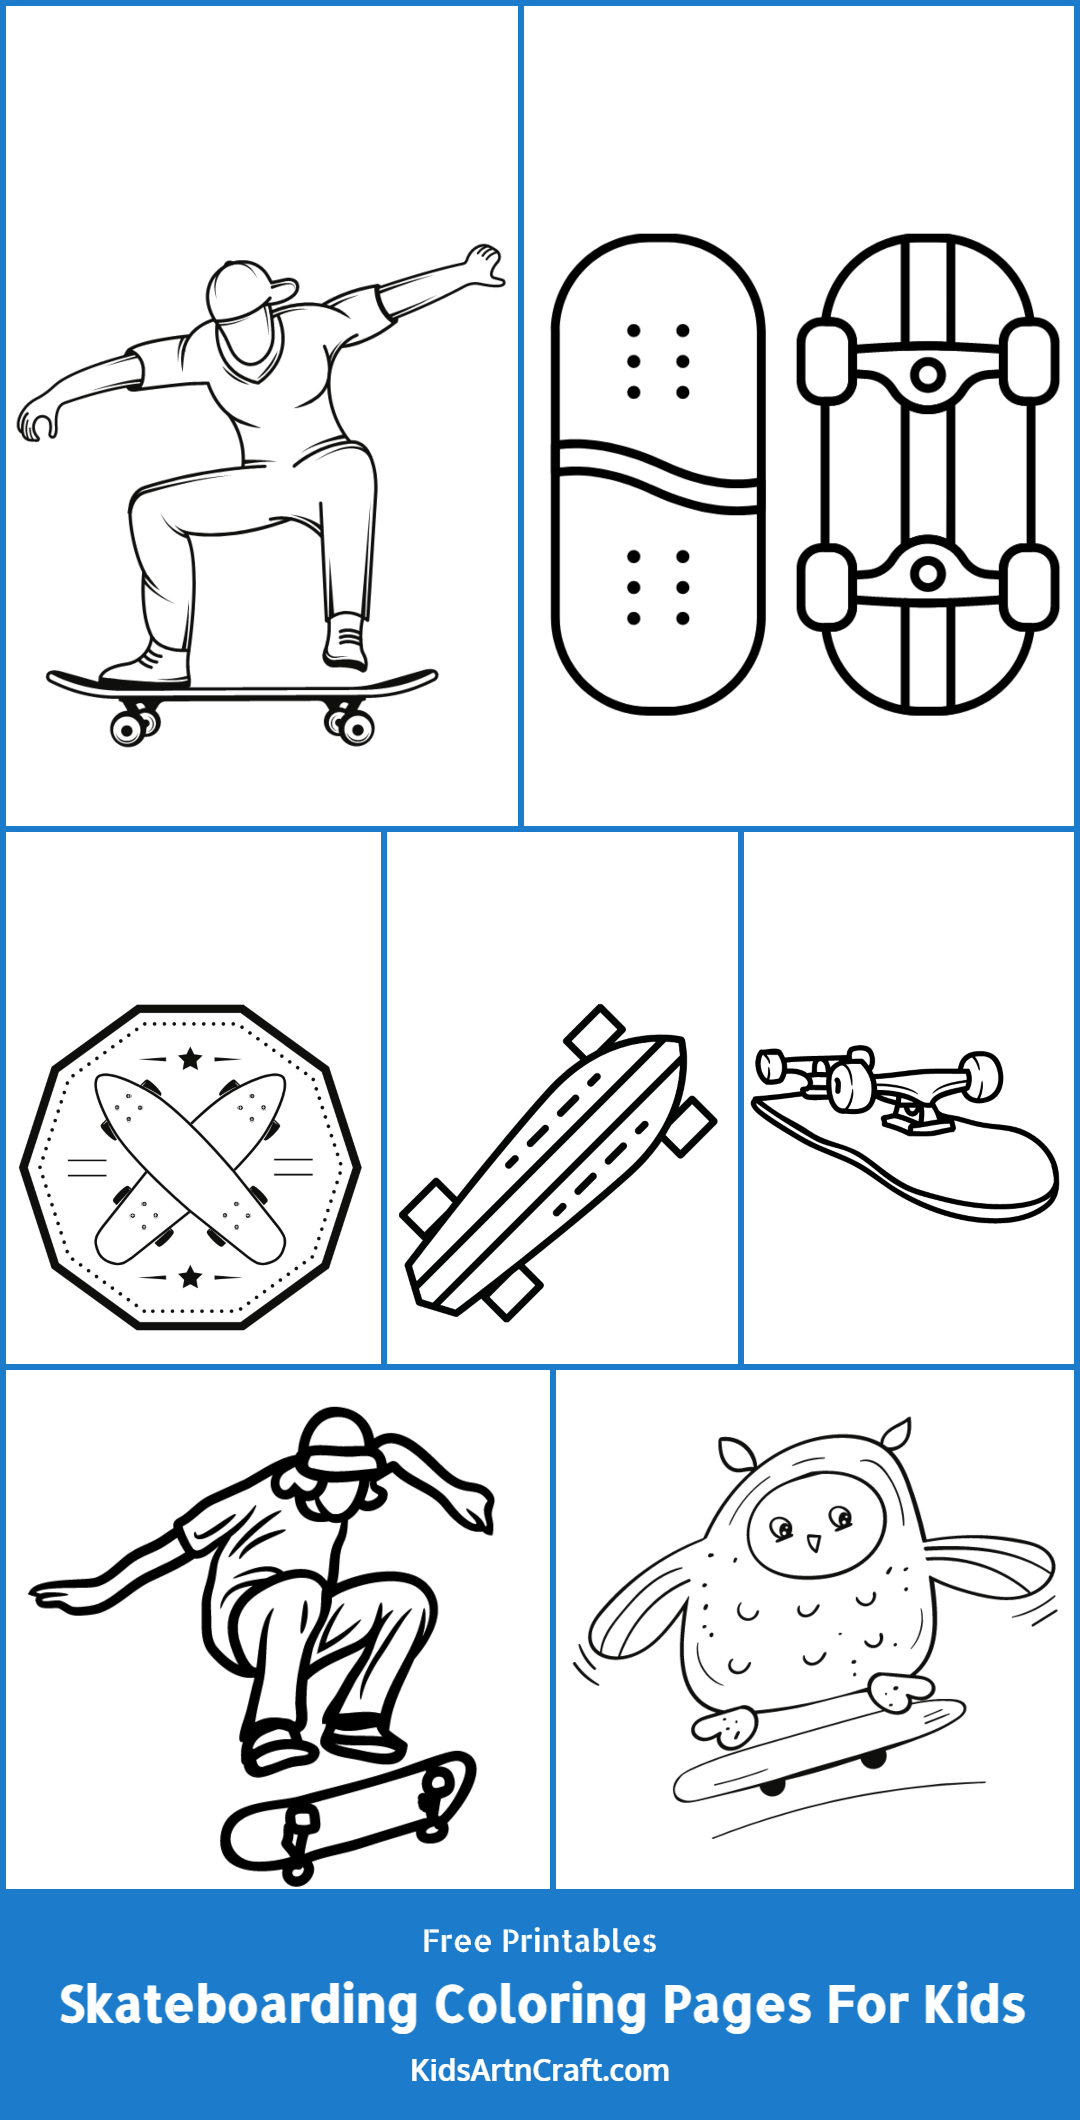 Skateboarding Coloring Pages For Kids – Free Printables